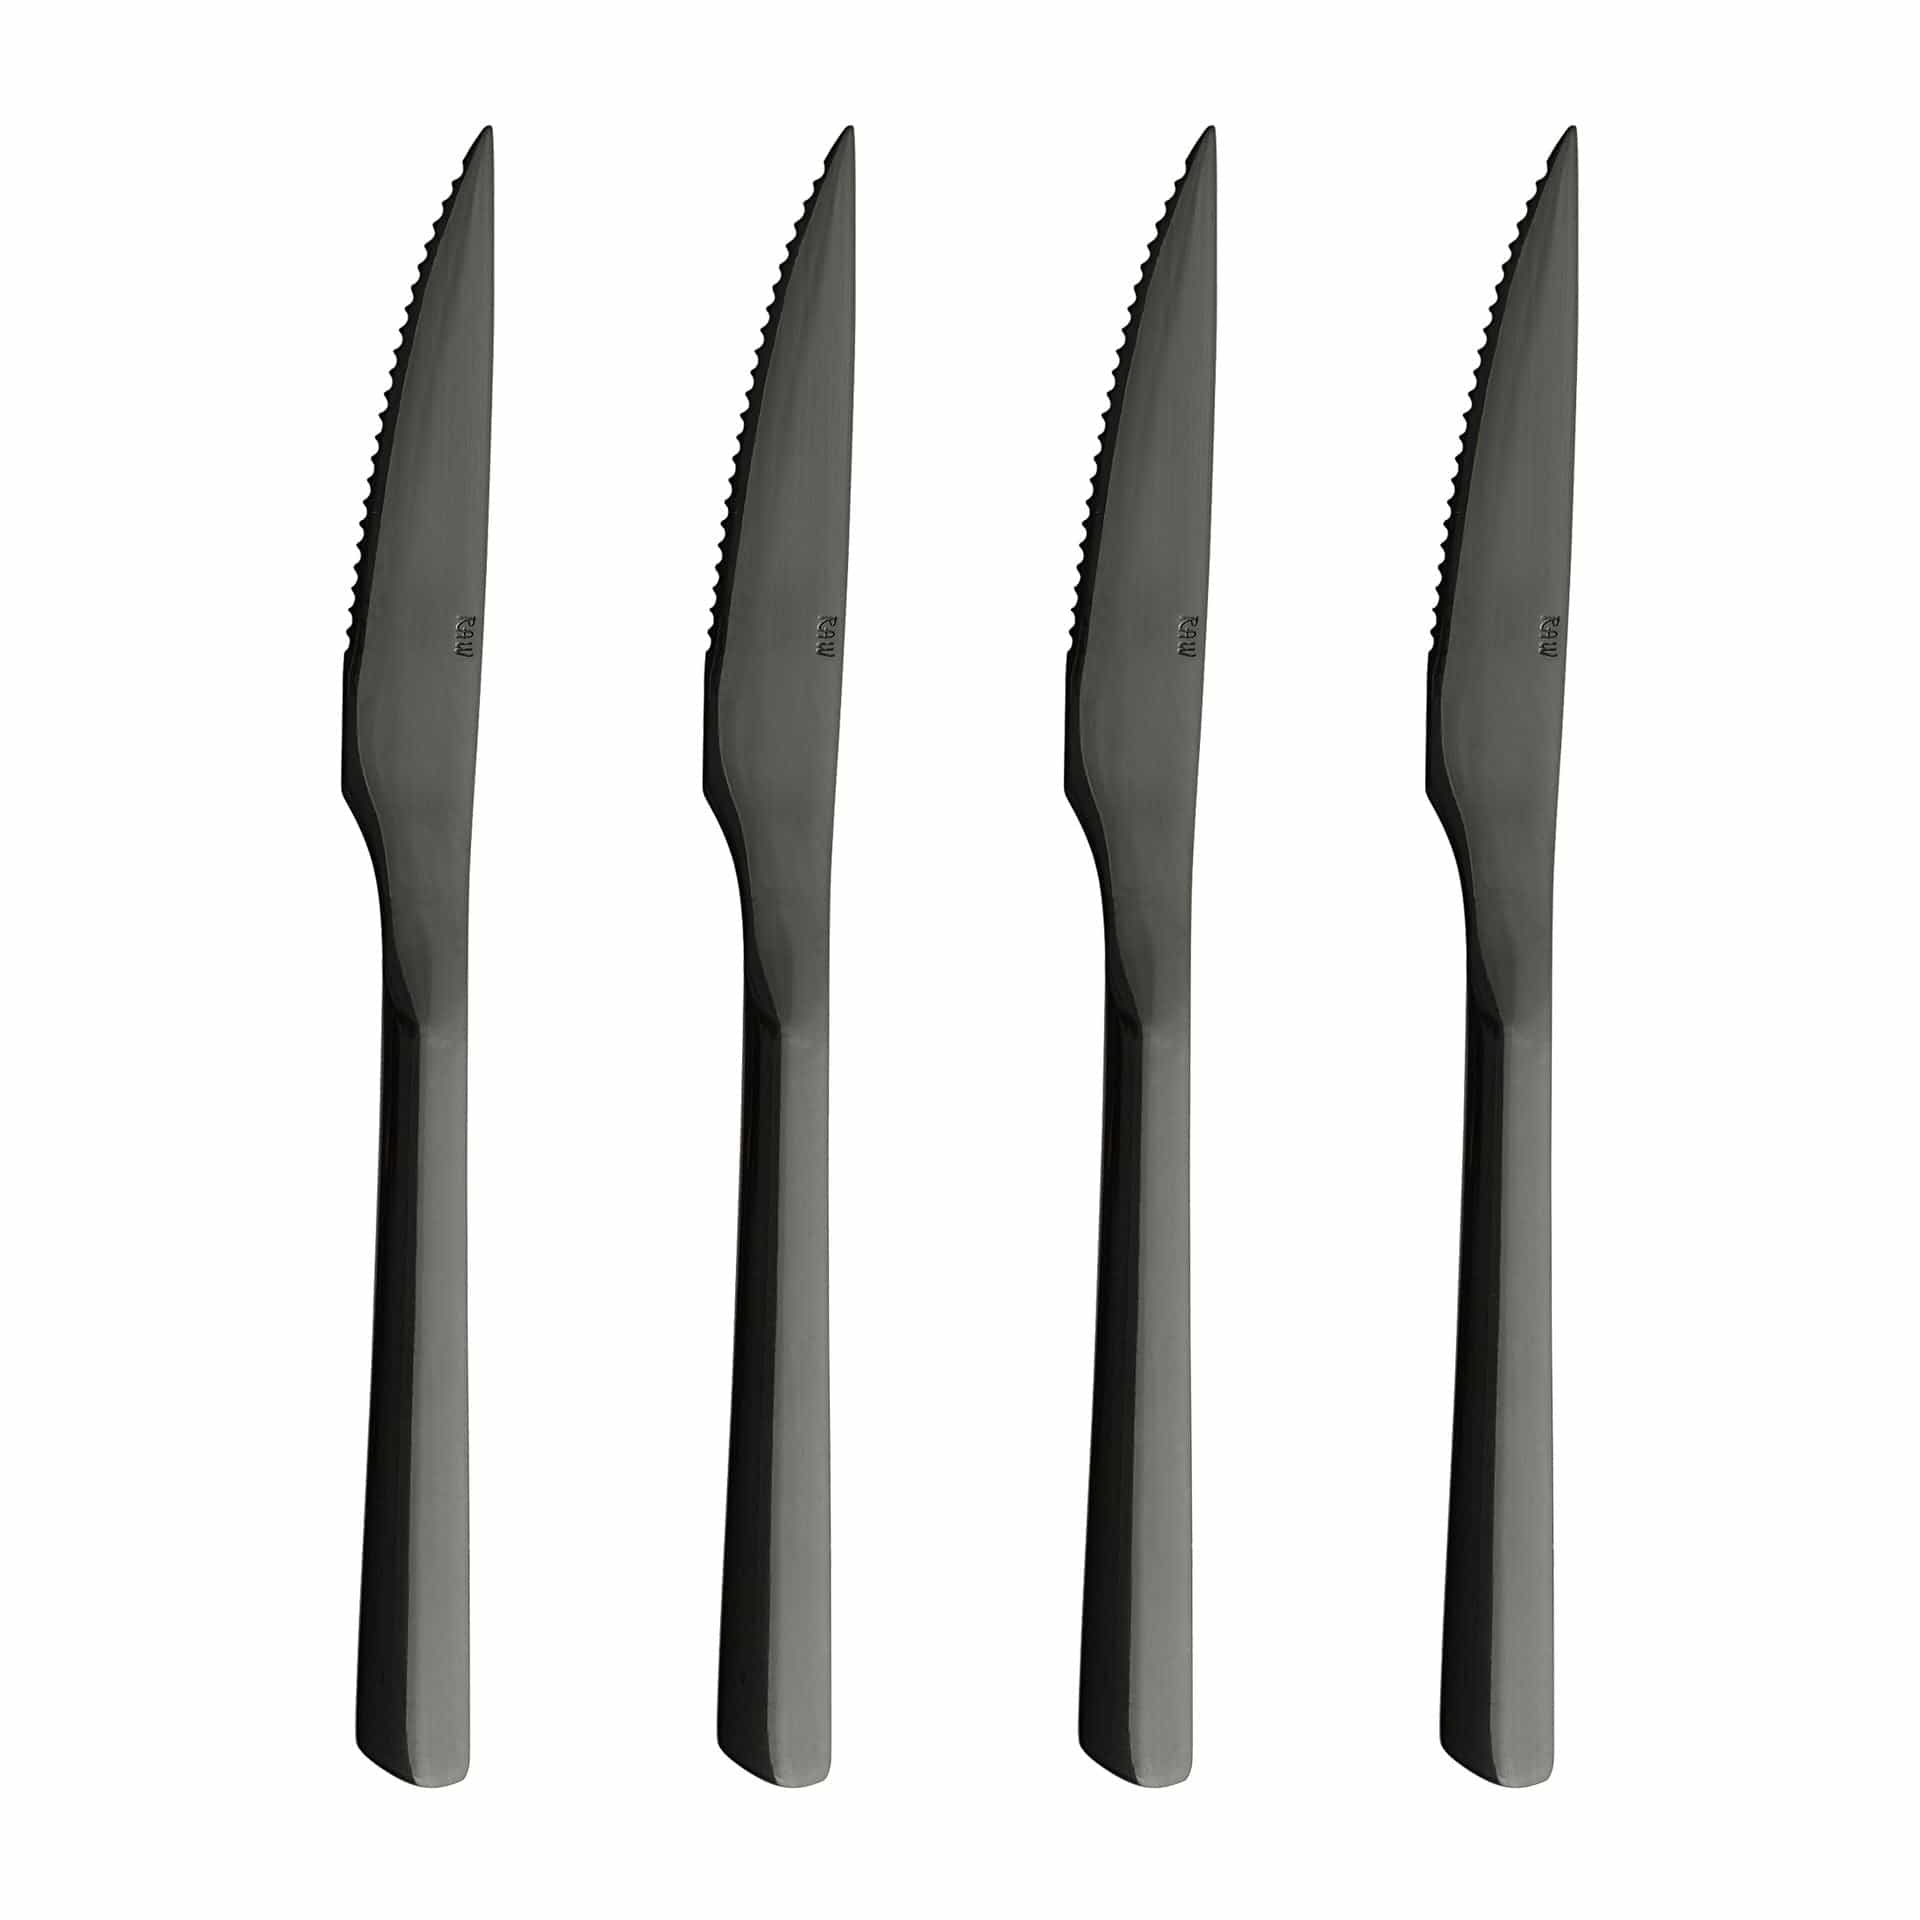 Aida Raw Set Of 4 Steakknives Black Coating, Comes In A Giftbox